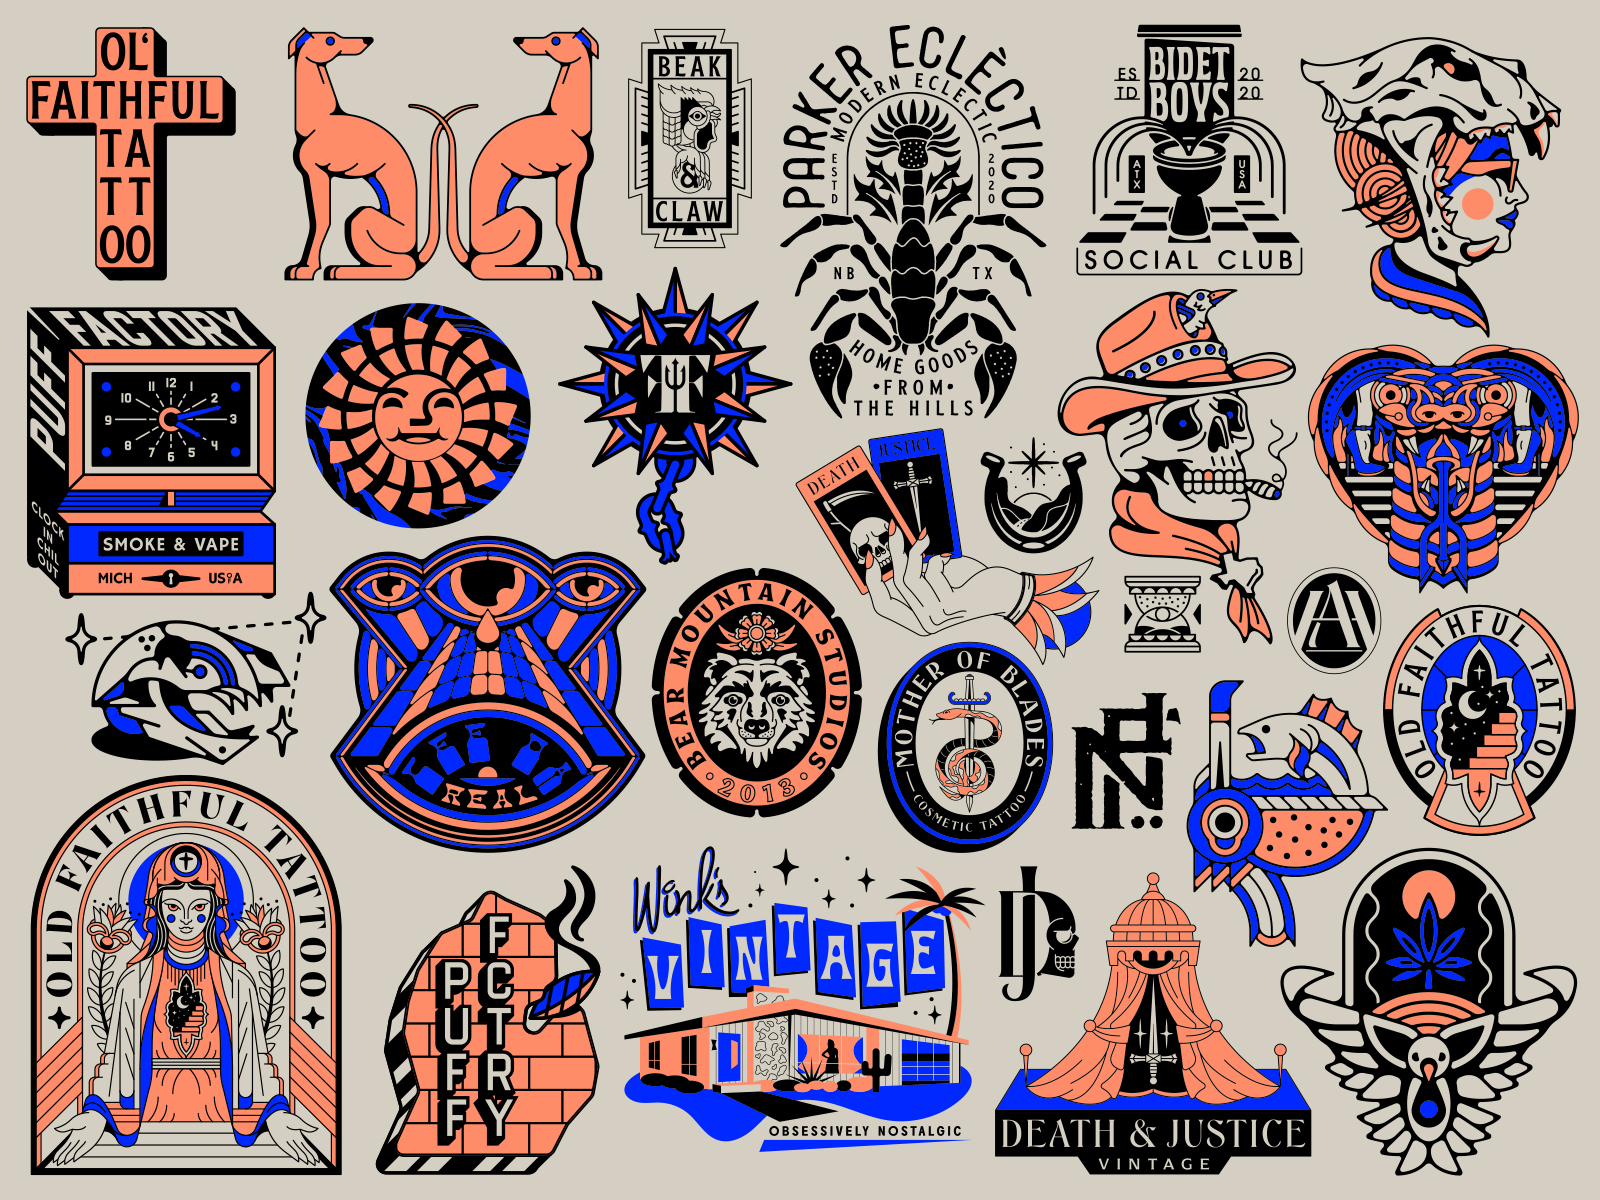 35 Of The Best American Traditional Tattoos For Men in 2023  FashionBeans